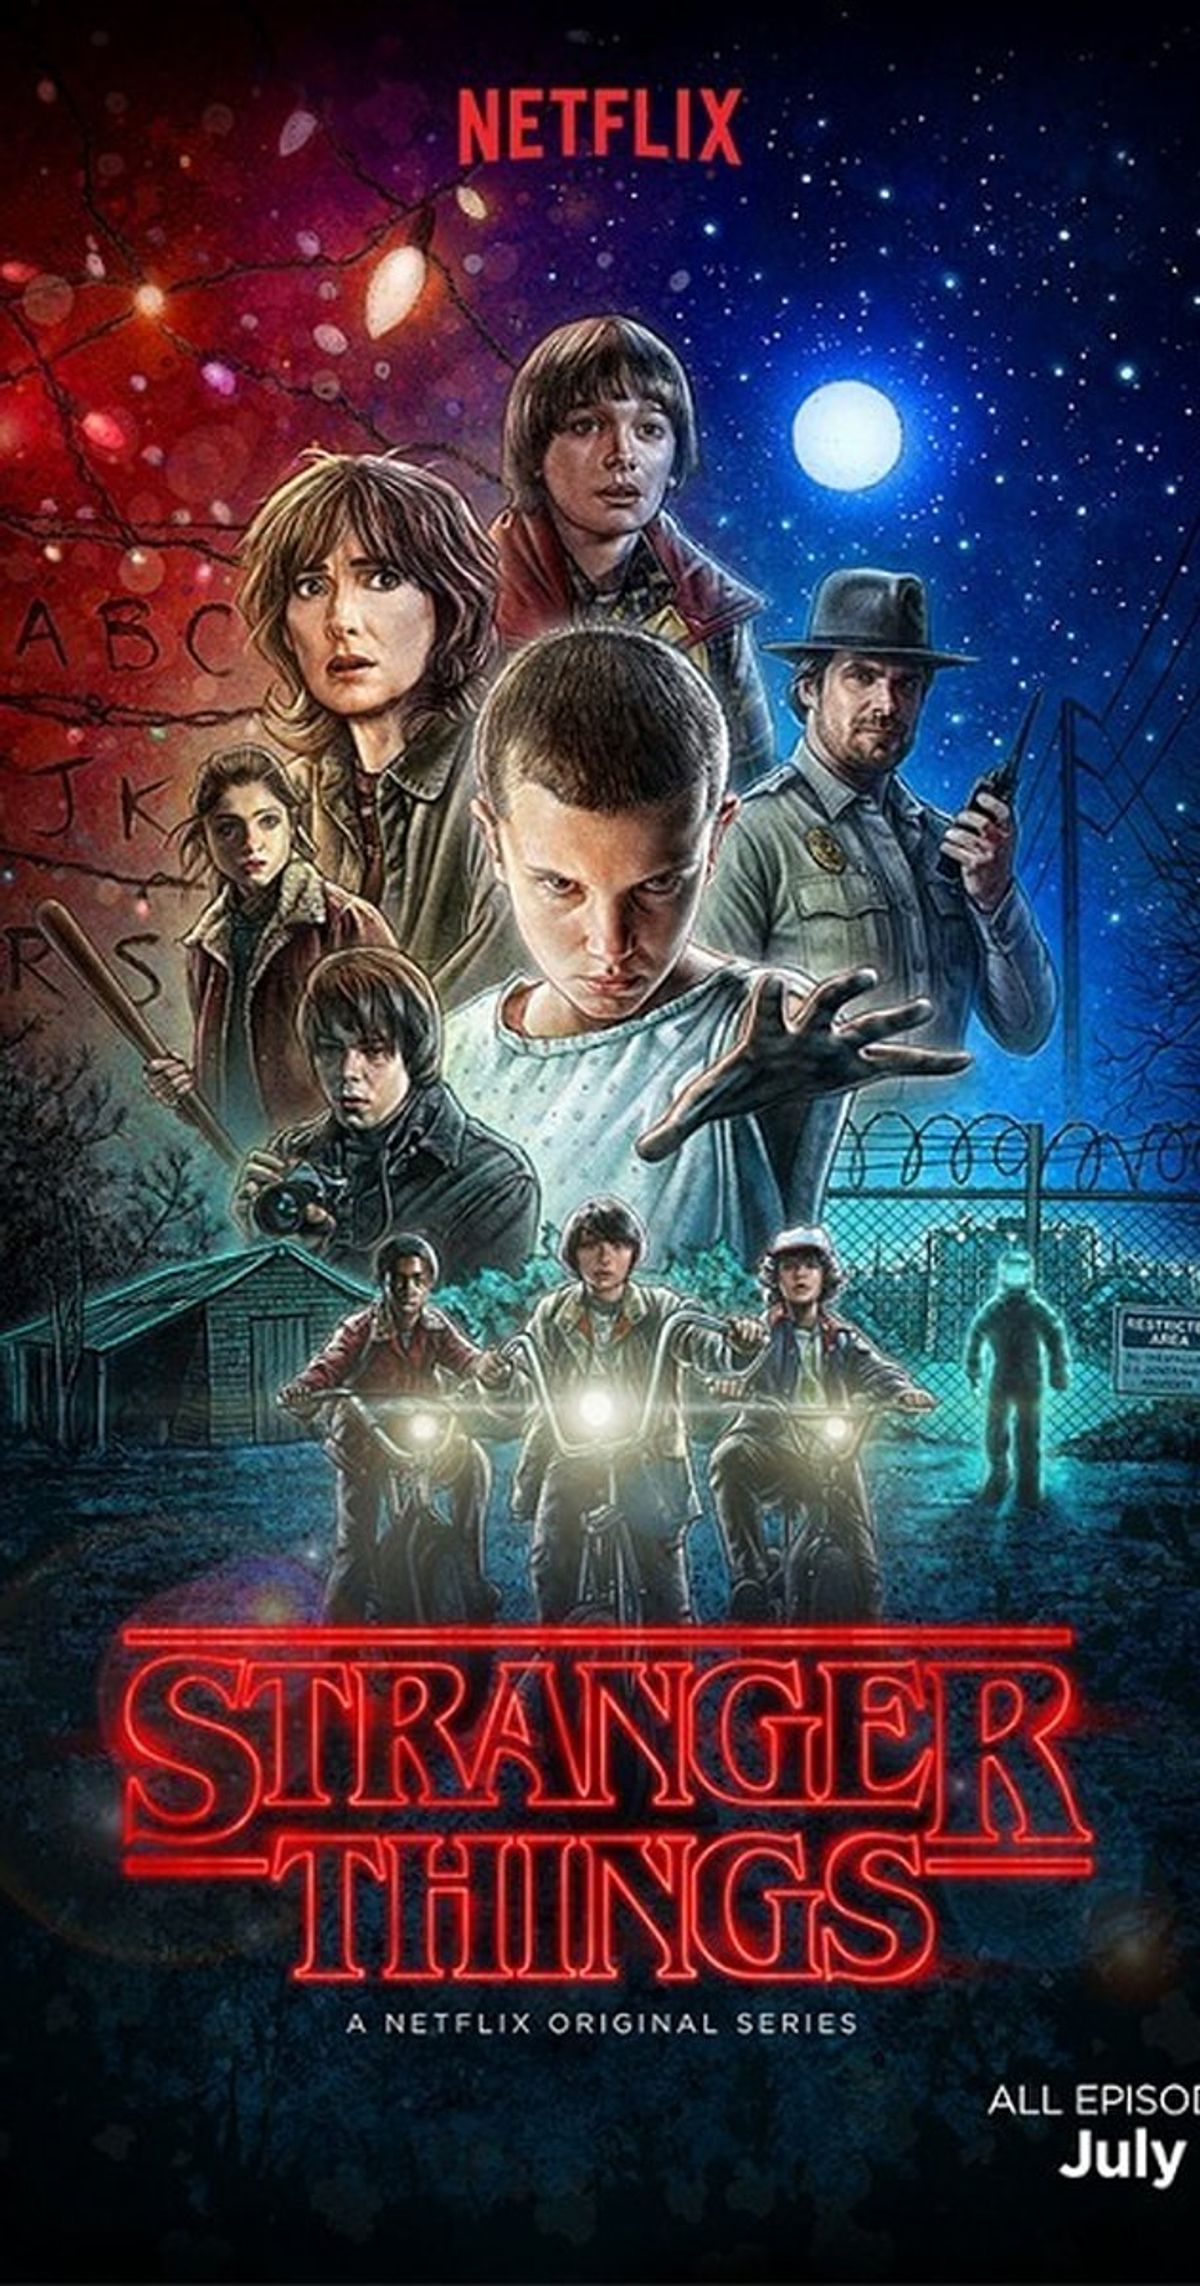 The Not-So-Official Ranking Of All The Songs In "Stranger Things"